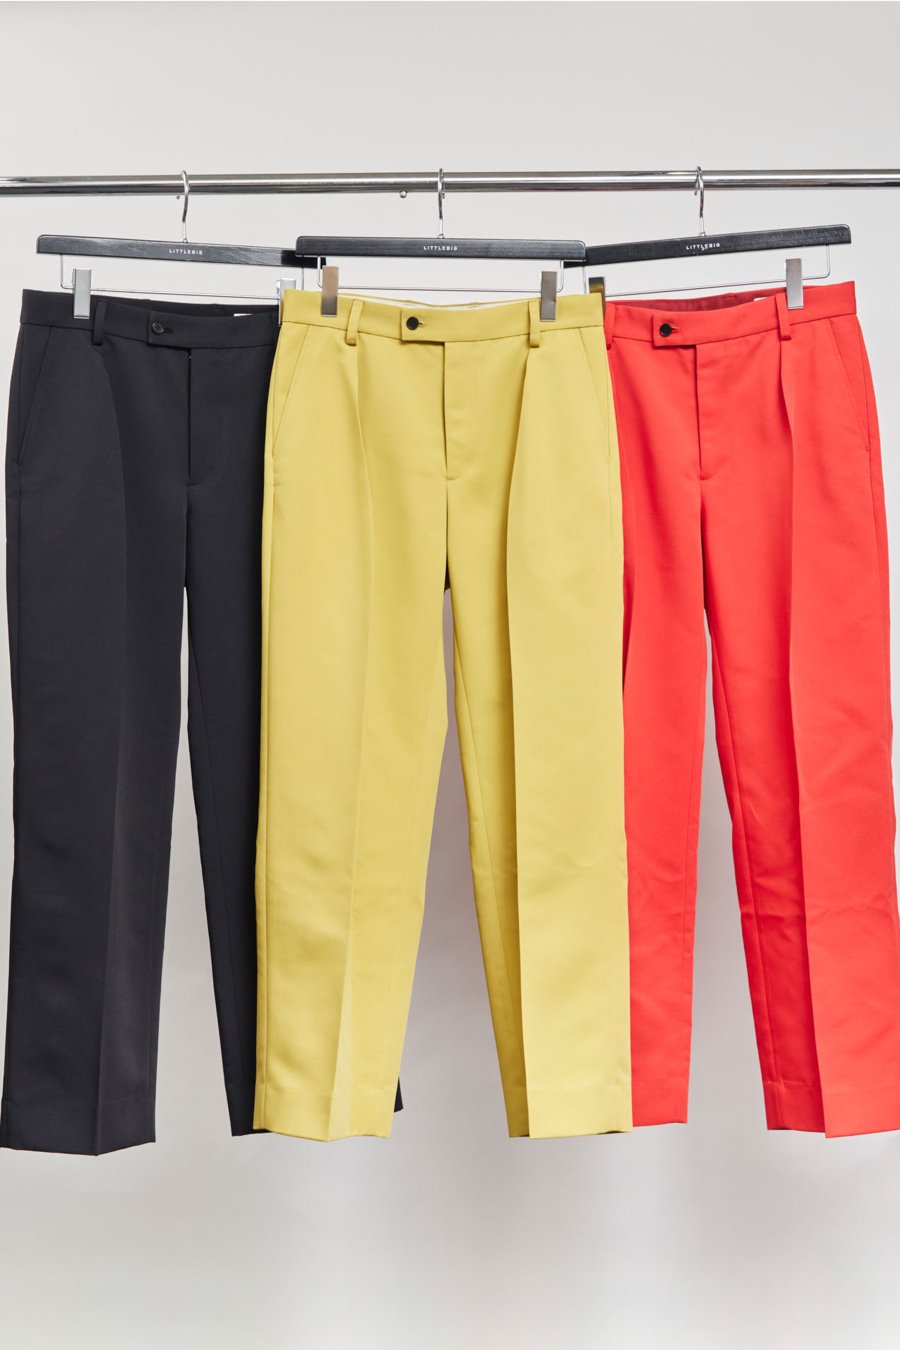 LITTLEBIG  Tuck Trousers(Red)<img class='new_mark_img2' src='https://img.shop-pro.jp/img/new/icons15.gif' style='border:none;display:inline;margin:0px;padding:0px;width:auto;' />